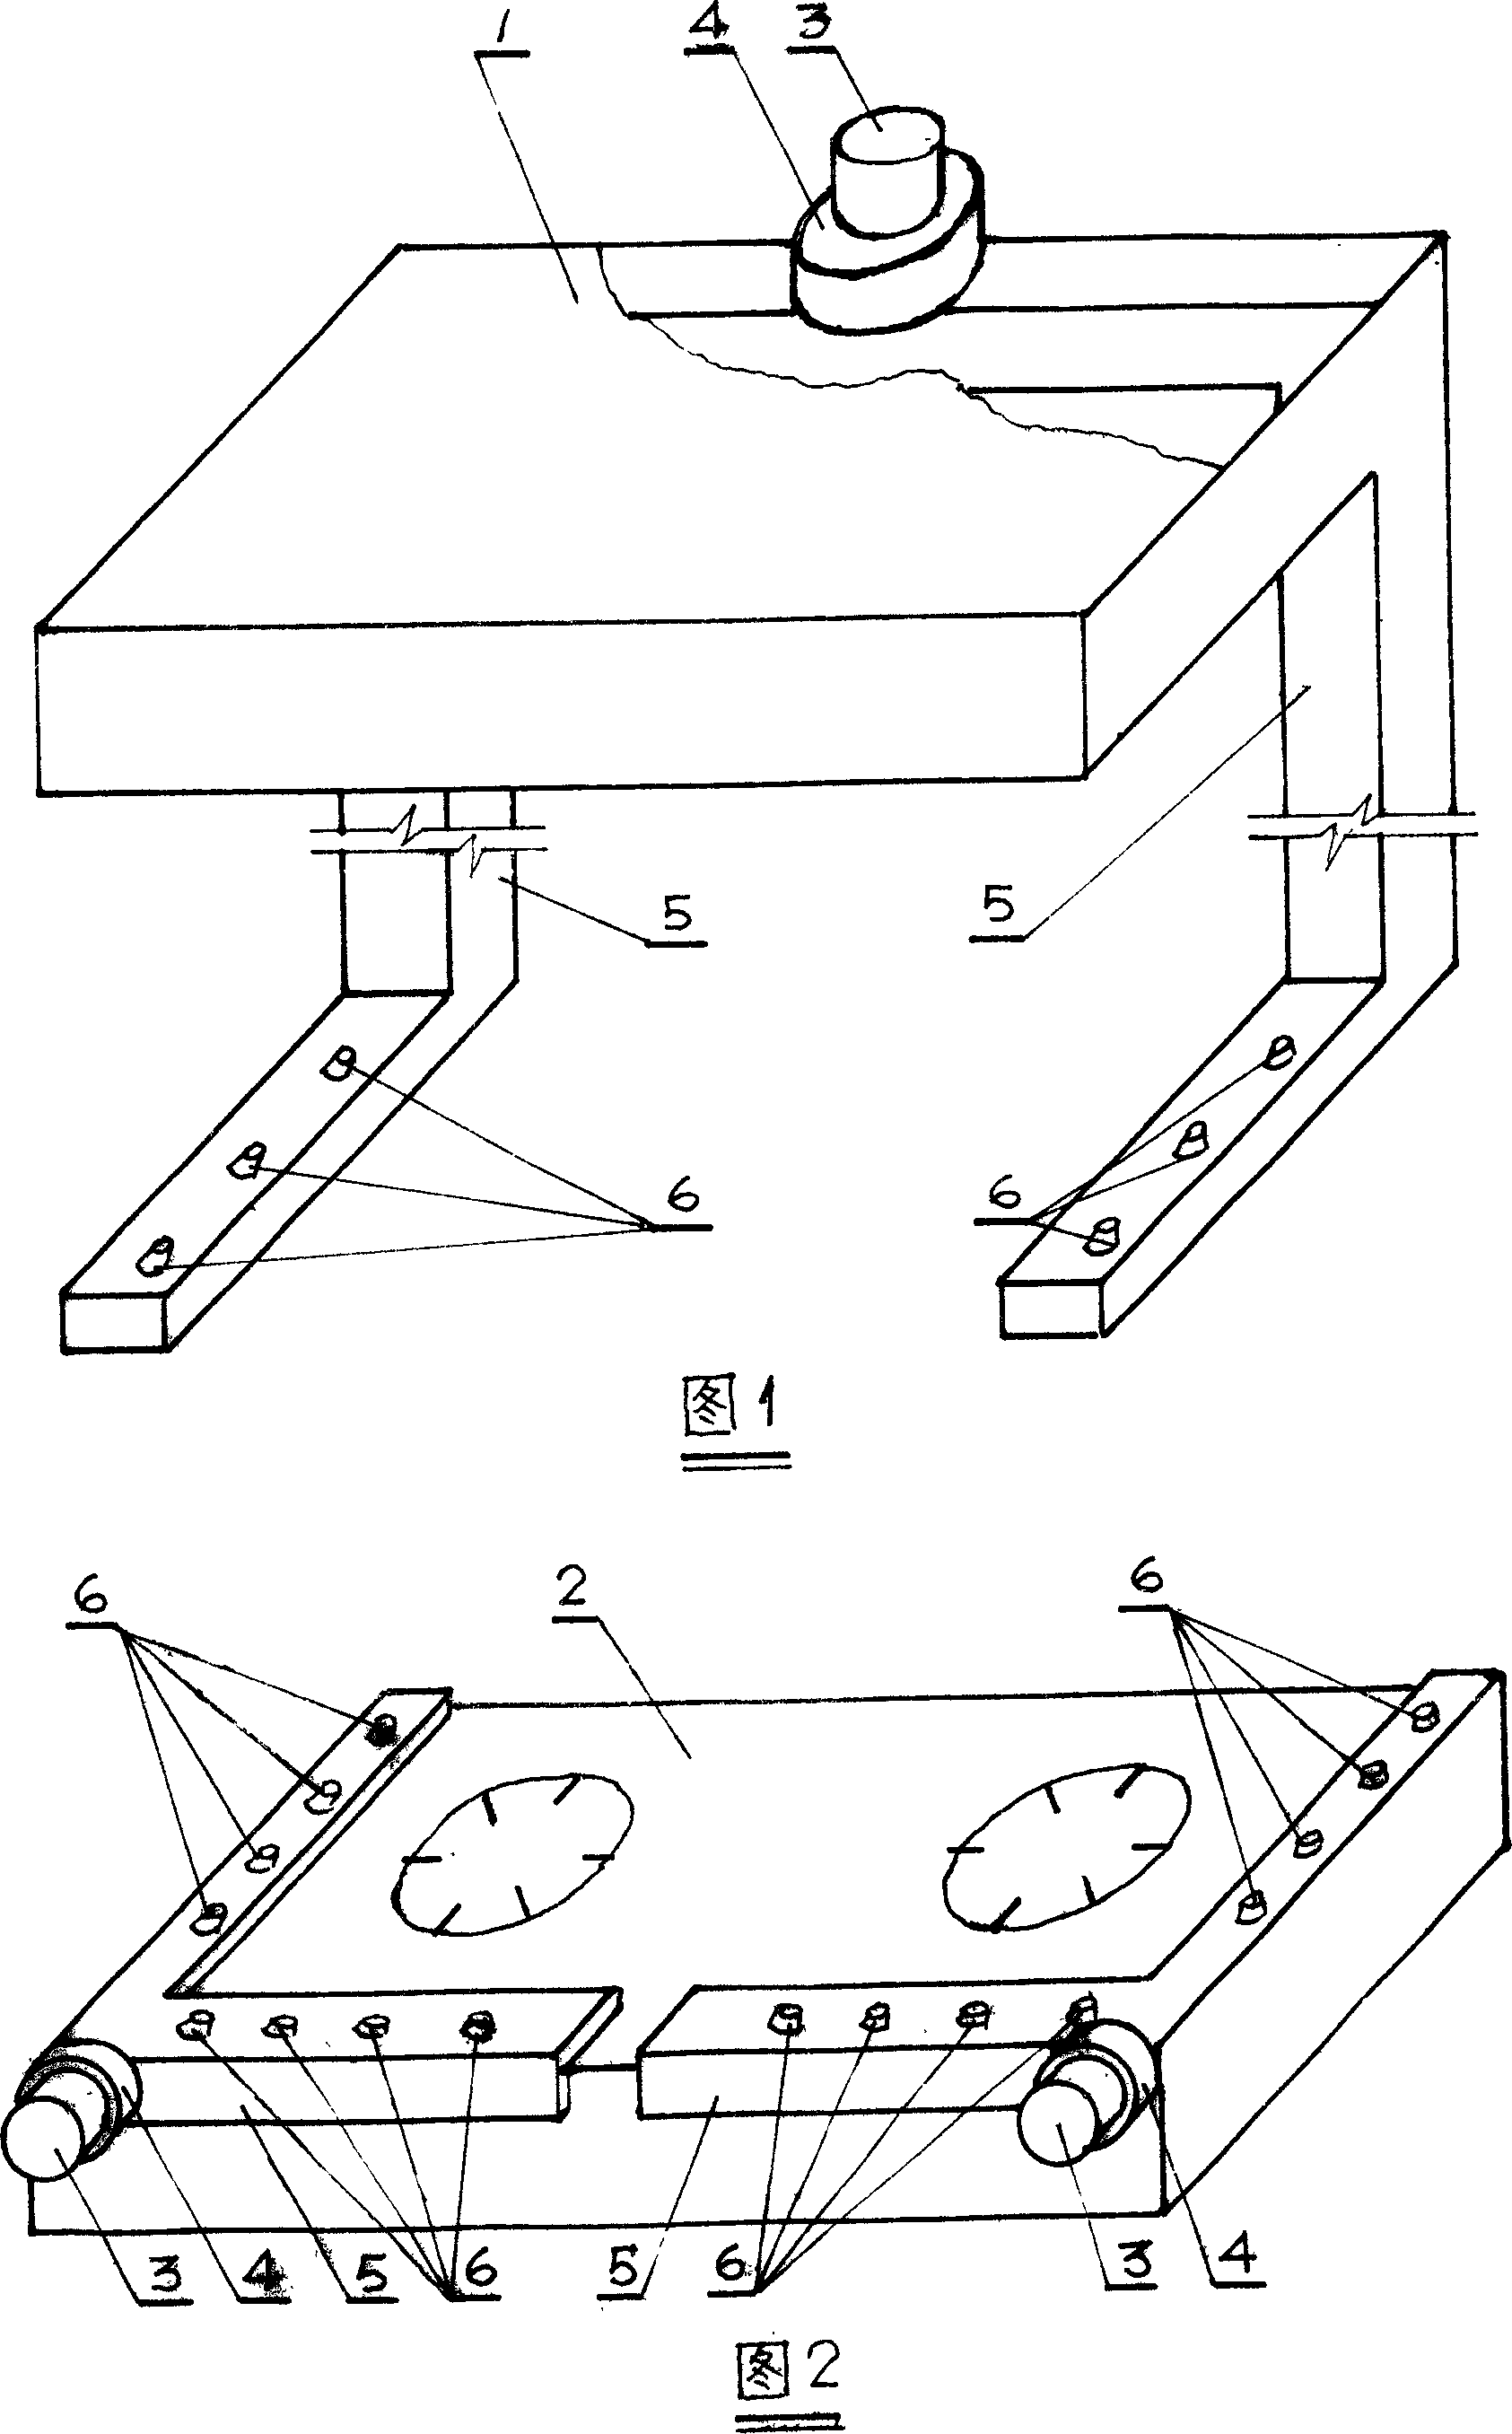 Air flow guide for fume used with fume exhaust fan